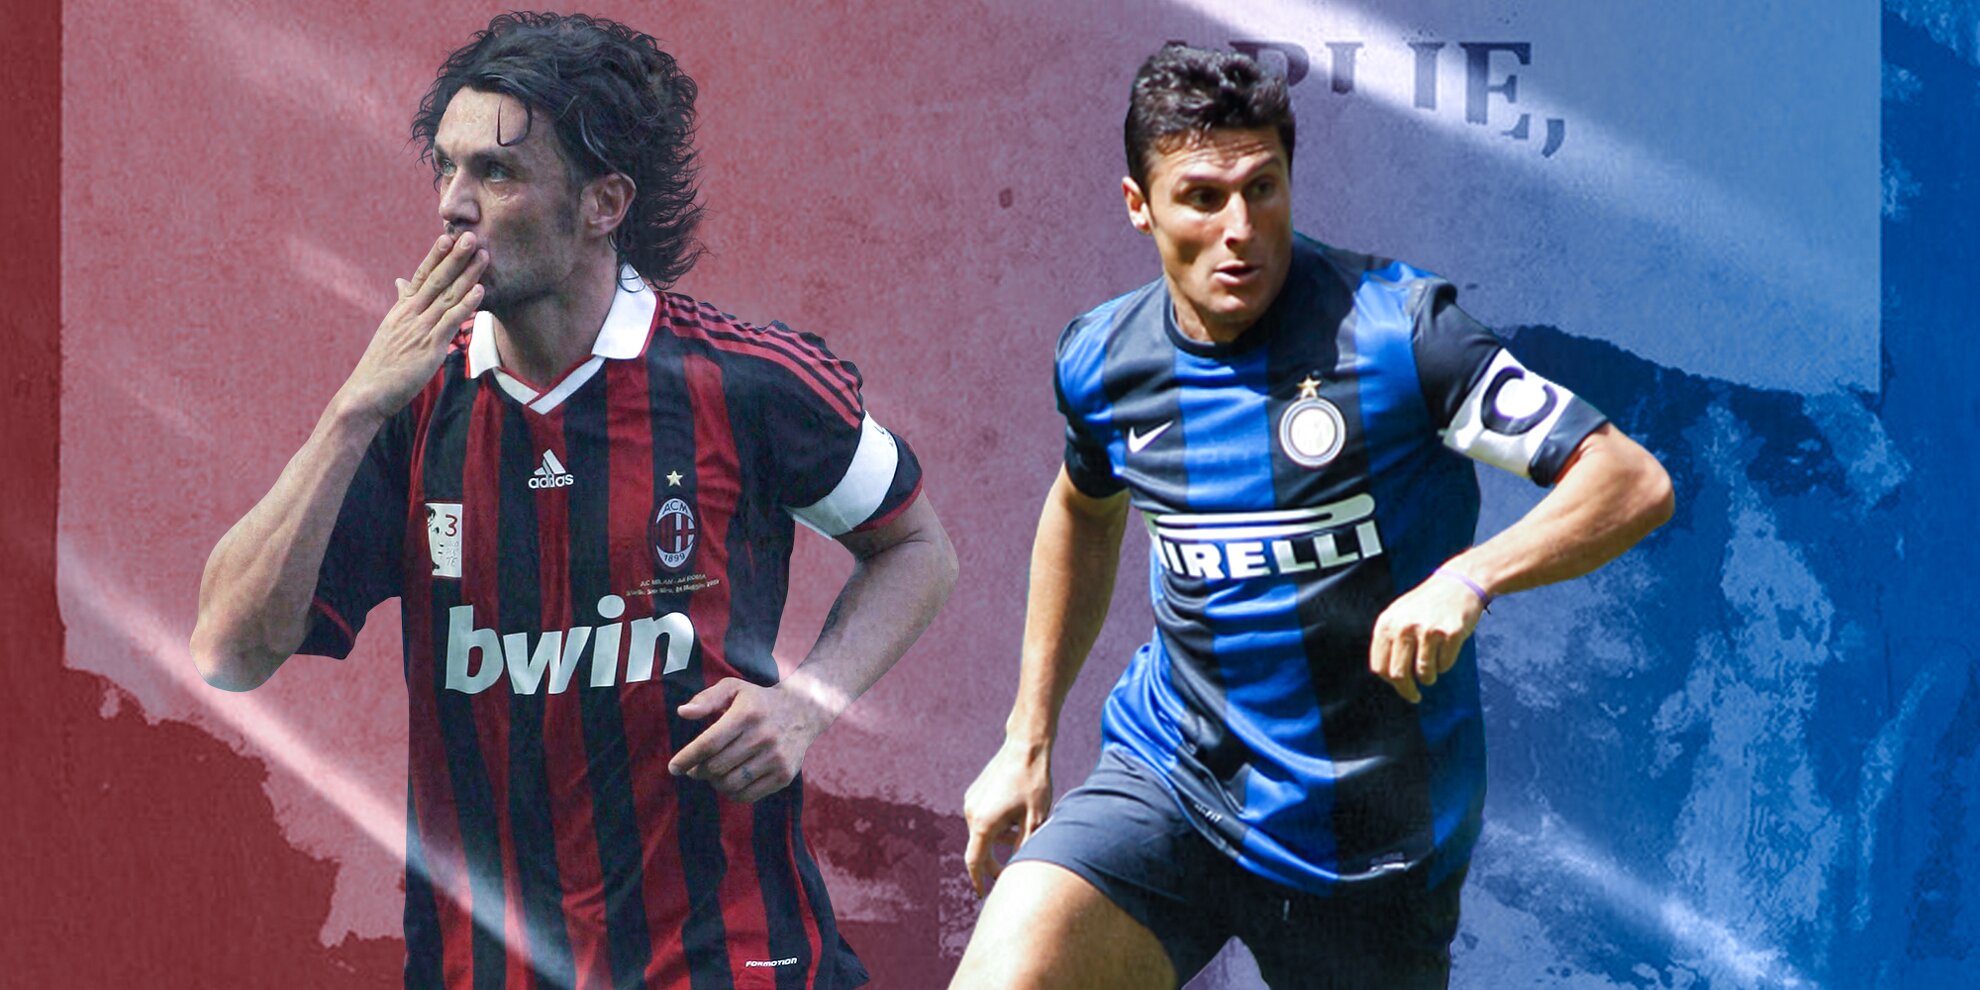 Top 10 players with most appearances in Milan Derby Javier Zanetti (inter milan) and paolo maldini (ac milan) 1x1